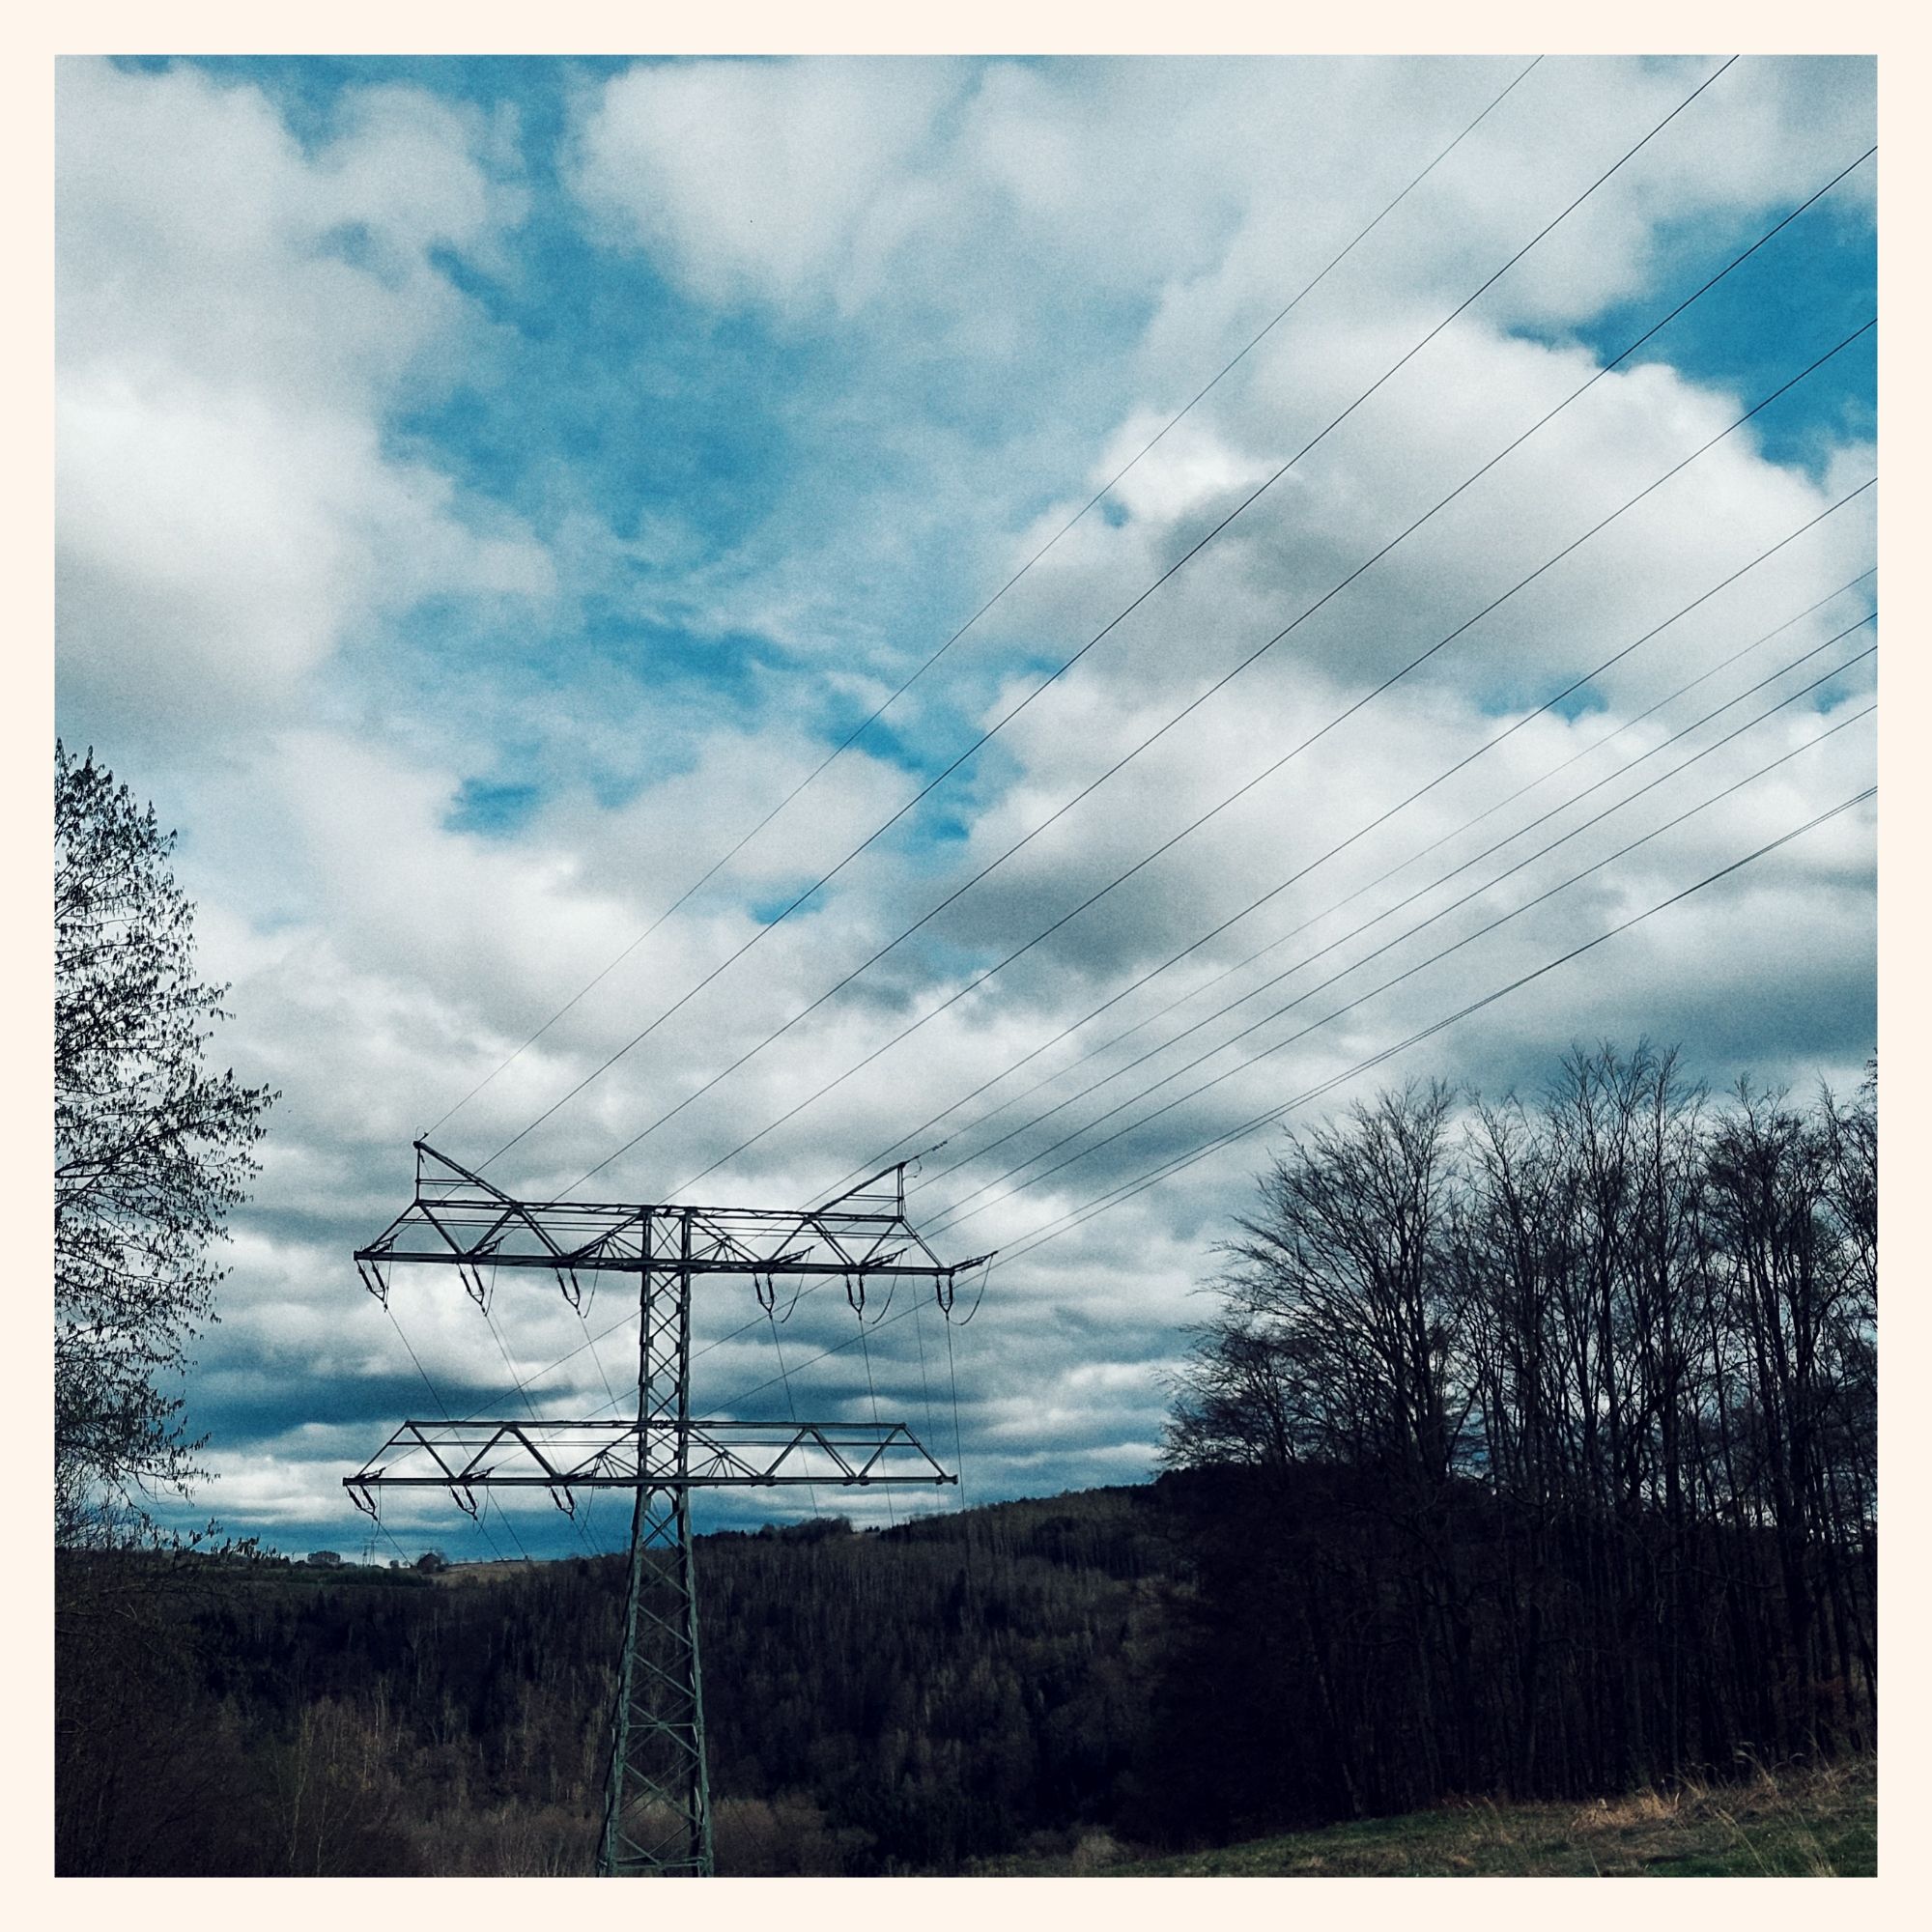 Looking along a power line in a forest. Blue sky, some large clouds, trees, dark hills in the lower part. Reasonably warm colors.